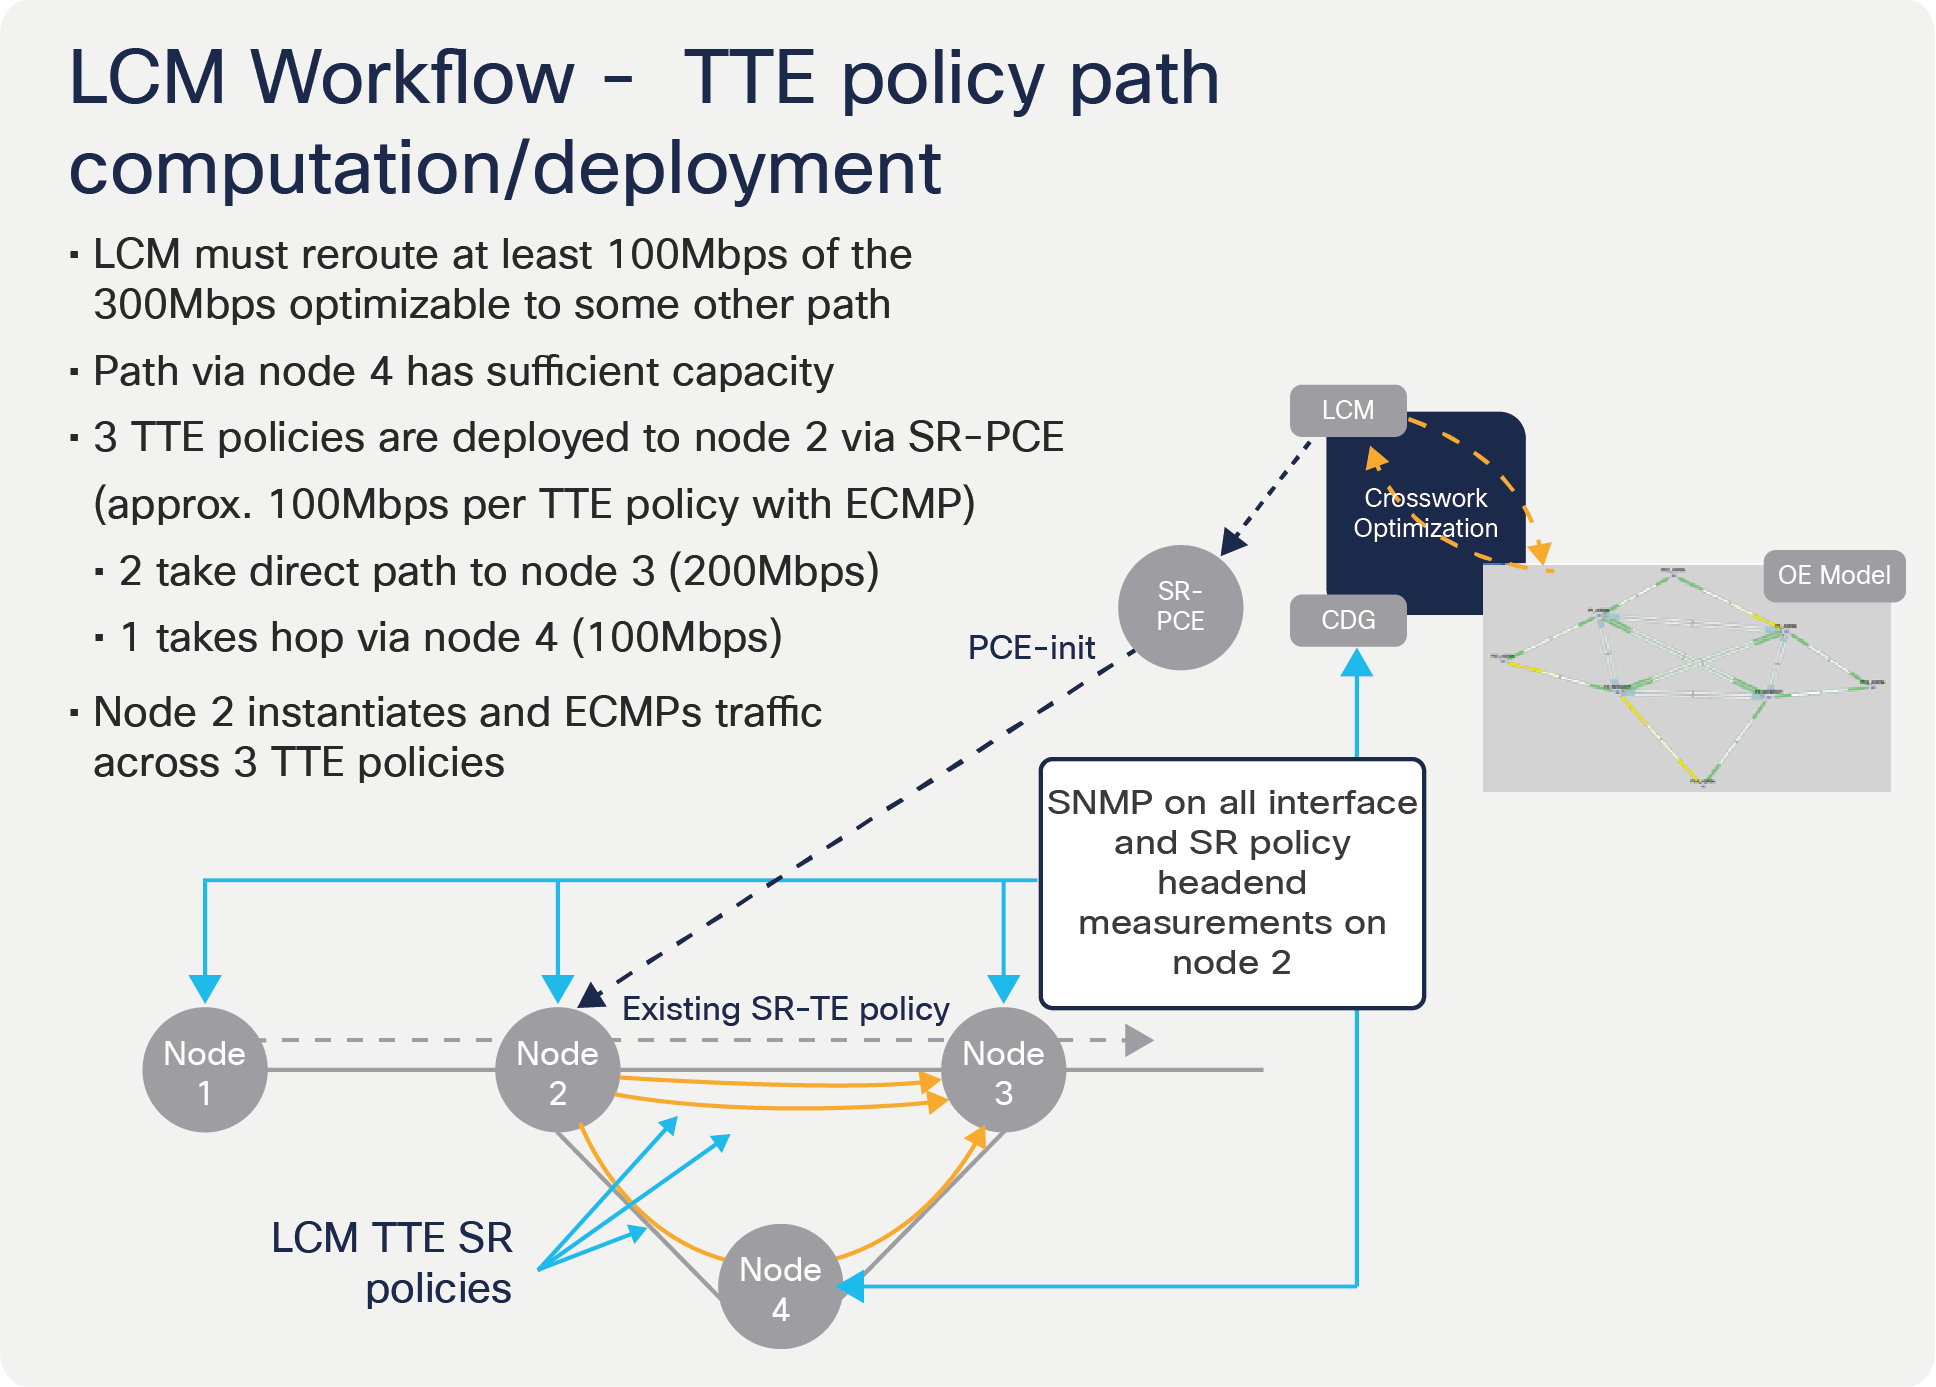 LCM tactical SR-TE policy path calculation and deployment